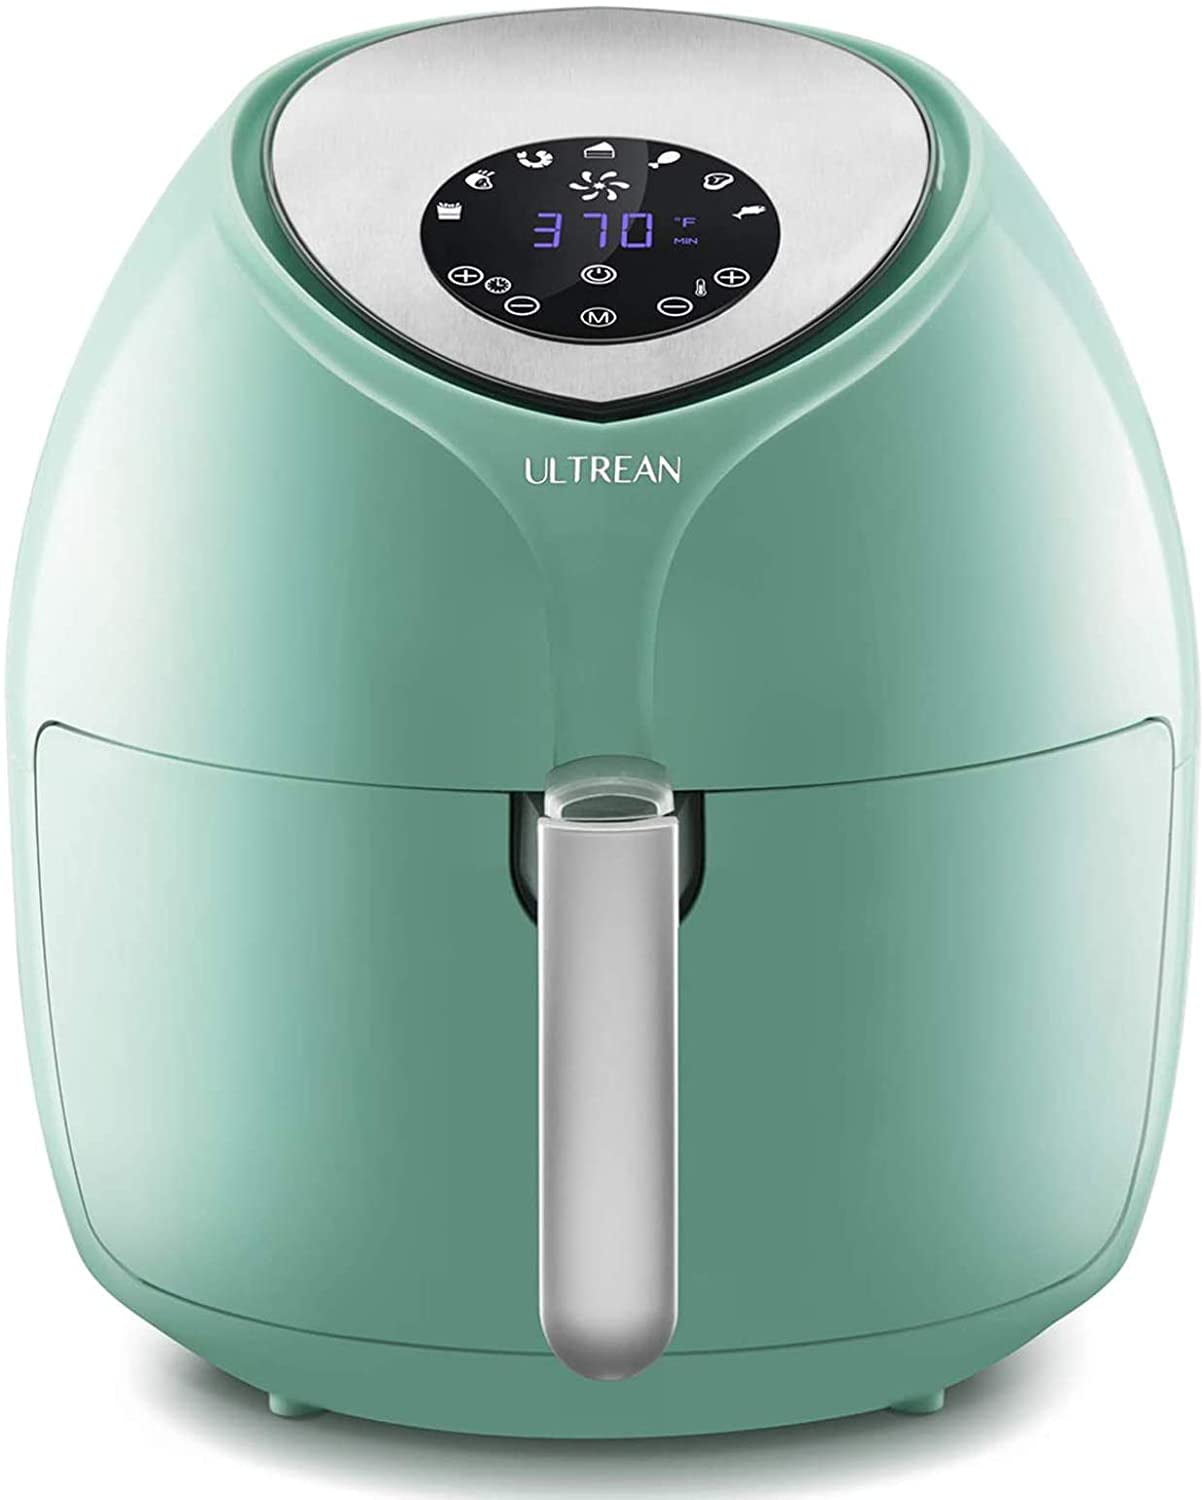 Ultrean Air Fryer 4.2Qt Electric Hot Air Fryers Oven Oilless Cooker with LCD ... 